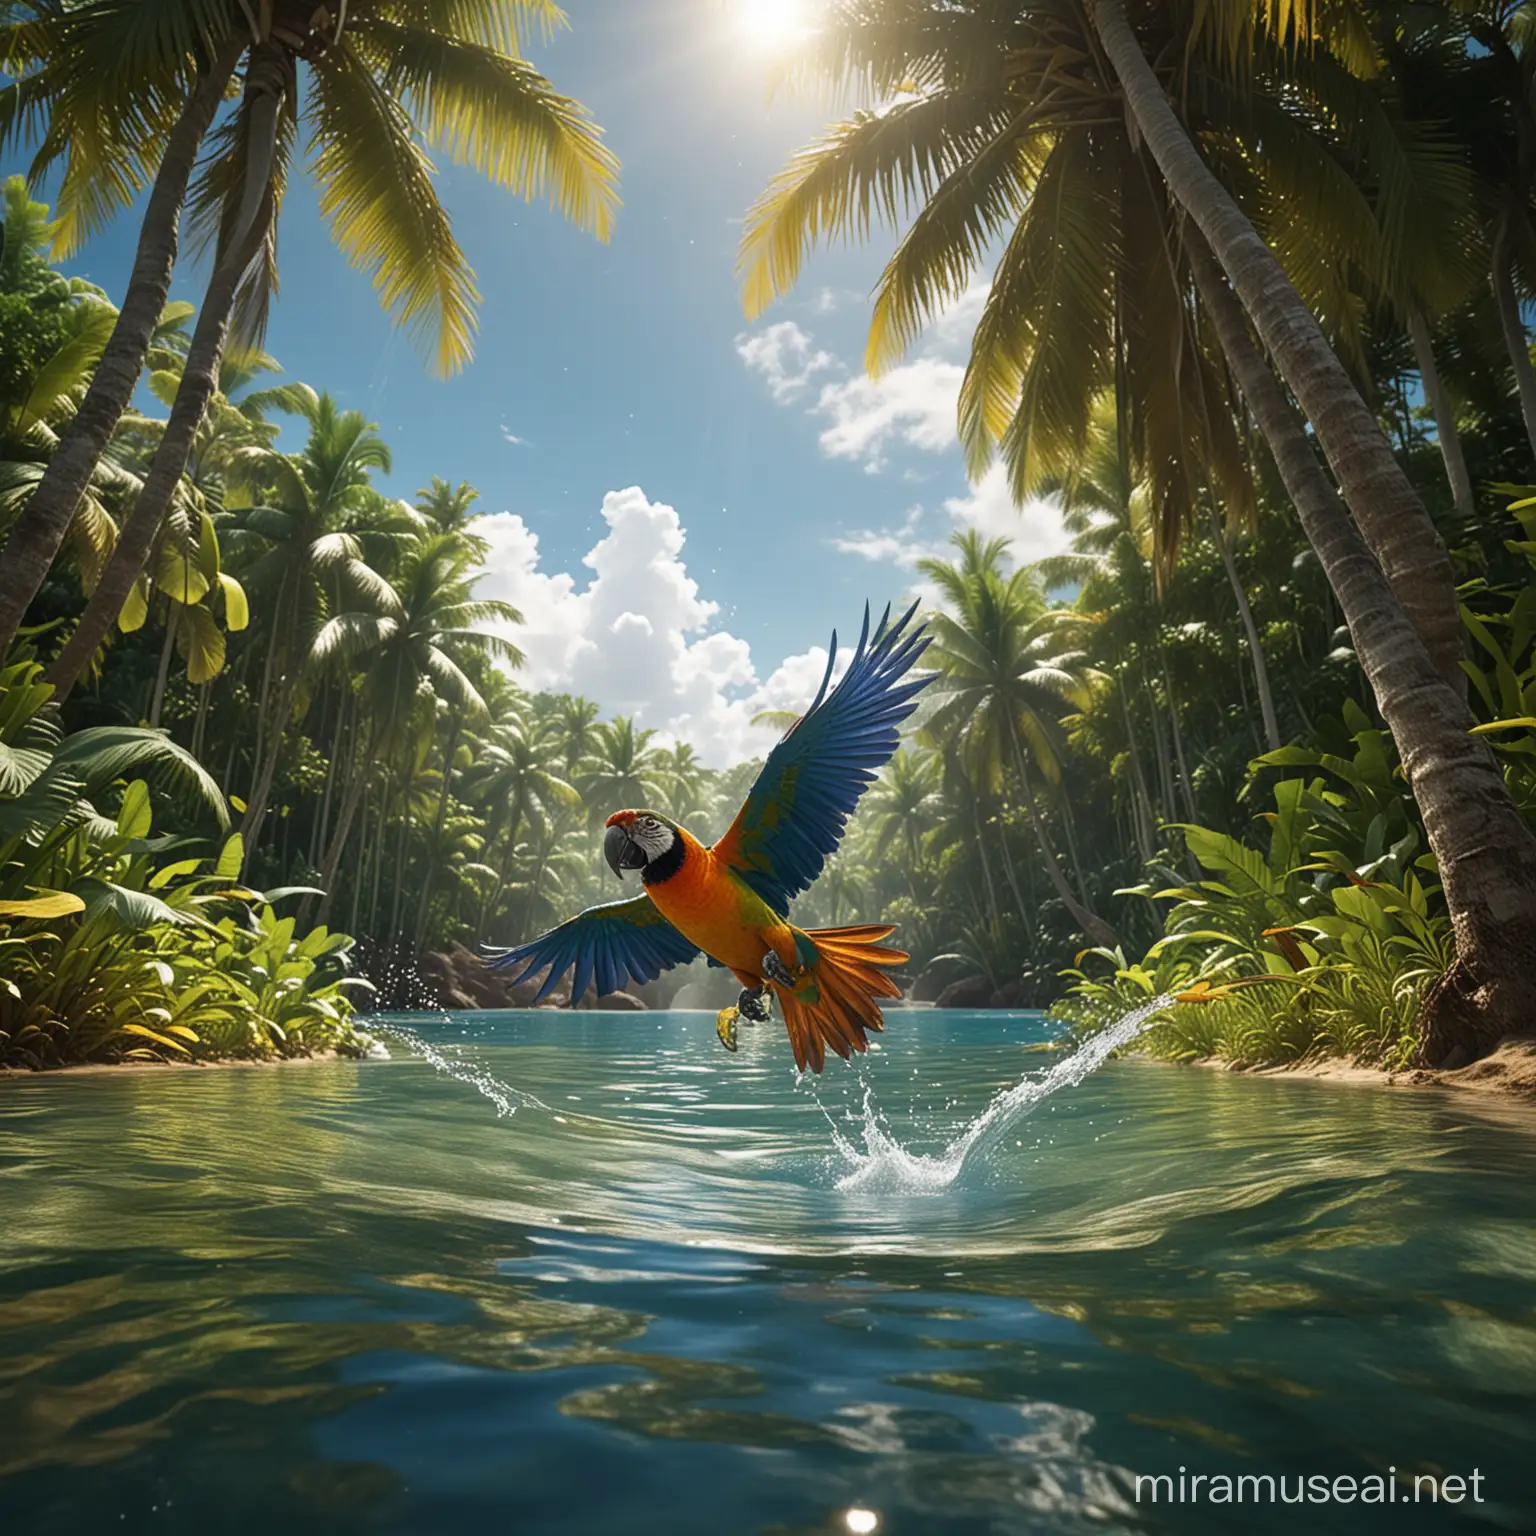 Create a vivid and fantastical image that embodies the essence of a tropical paradise. The central focus is a giant, open coconut with its hard shell forming an arch shape, and its interior mirroring a lush landscape. Waterfalls cascade from within the coconut, spilling into a serene pool below. The coconut is set on a backdrop of a rich jungle with a vibrant blue sky peeking through the foliage. Atop the coconut, add lush, green palm fronds suggesting life and abundance. A brightly colored parrot in mid-flight enhances the tropical atmosphere, adding a dynamic element to the scene. The image should be rich in detail with hyper-realistic textures, particularly the coconut's rough exterior and the transparency of the water. Lighting plays a crucial role, with sun rays filtering through the clouds and foliage, creating a radiant and heavenly glow, 32k render, hyperrealistic, detailed.